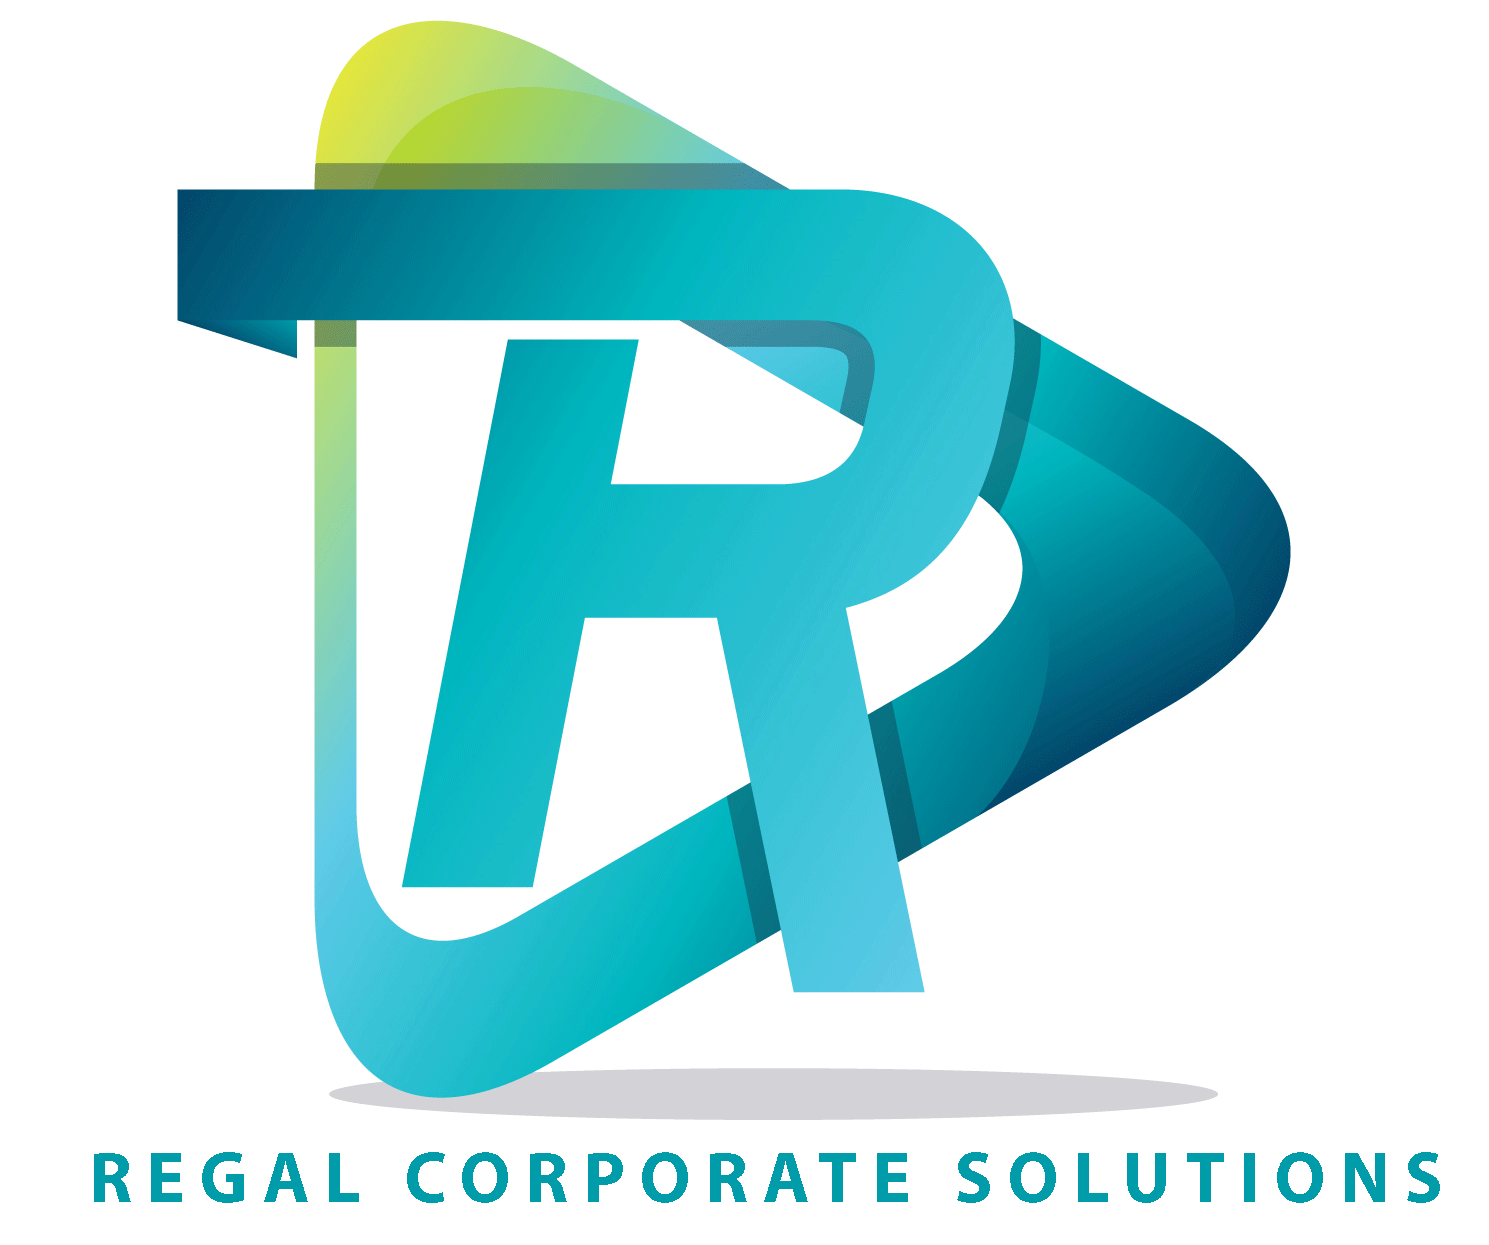 Regal Corporate Solutions solutions logo